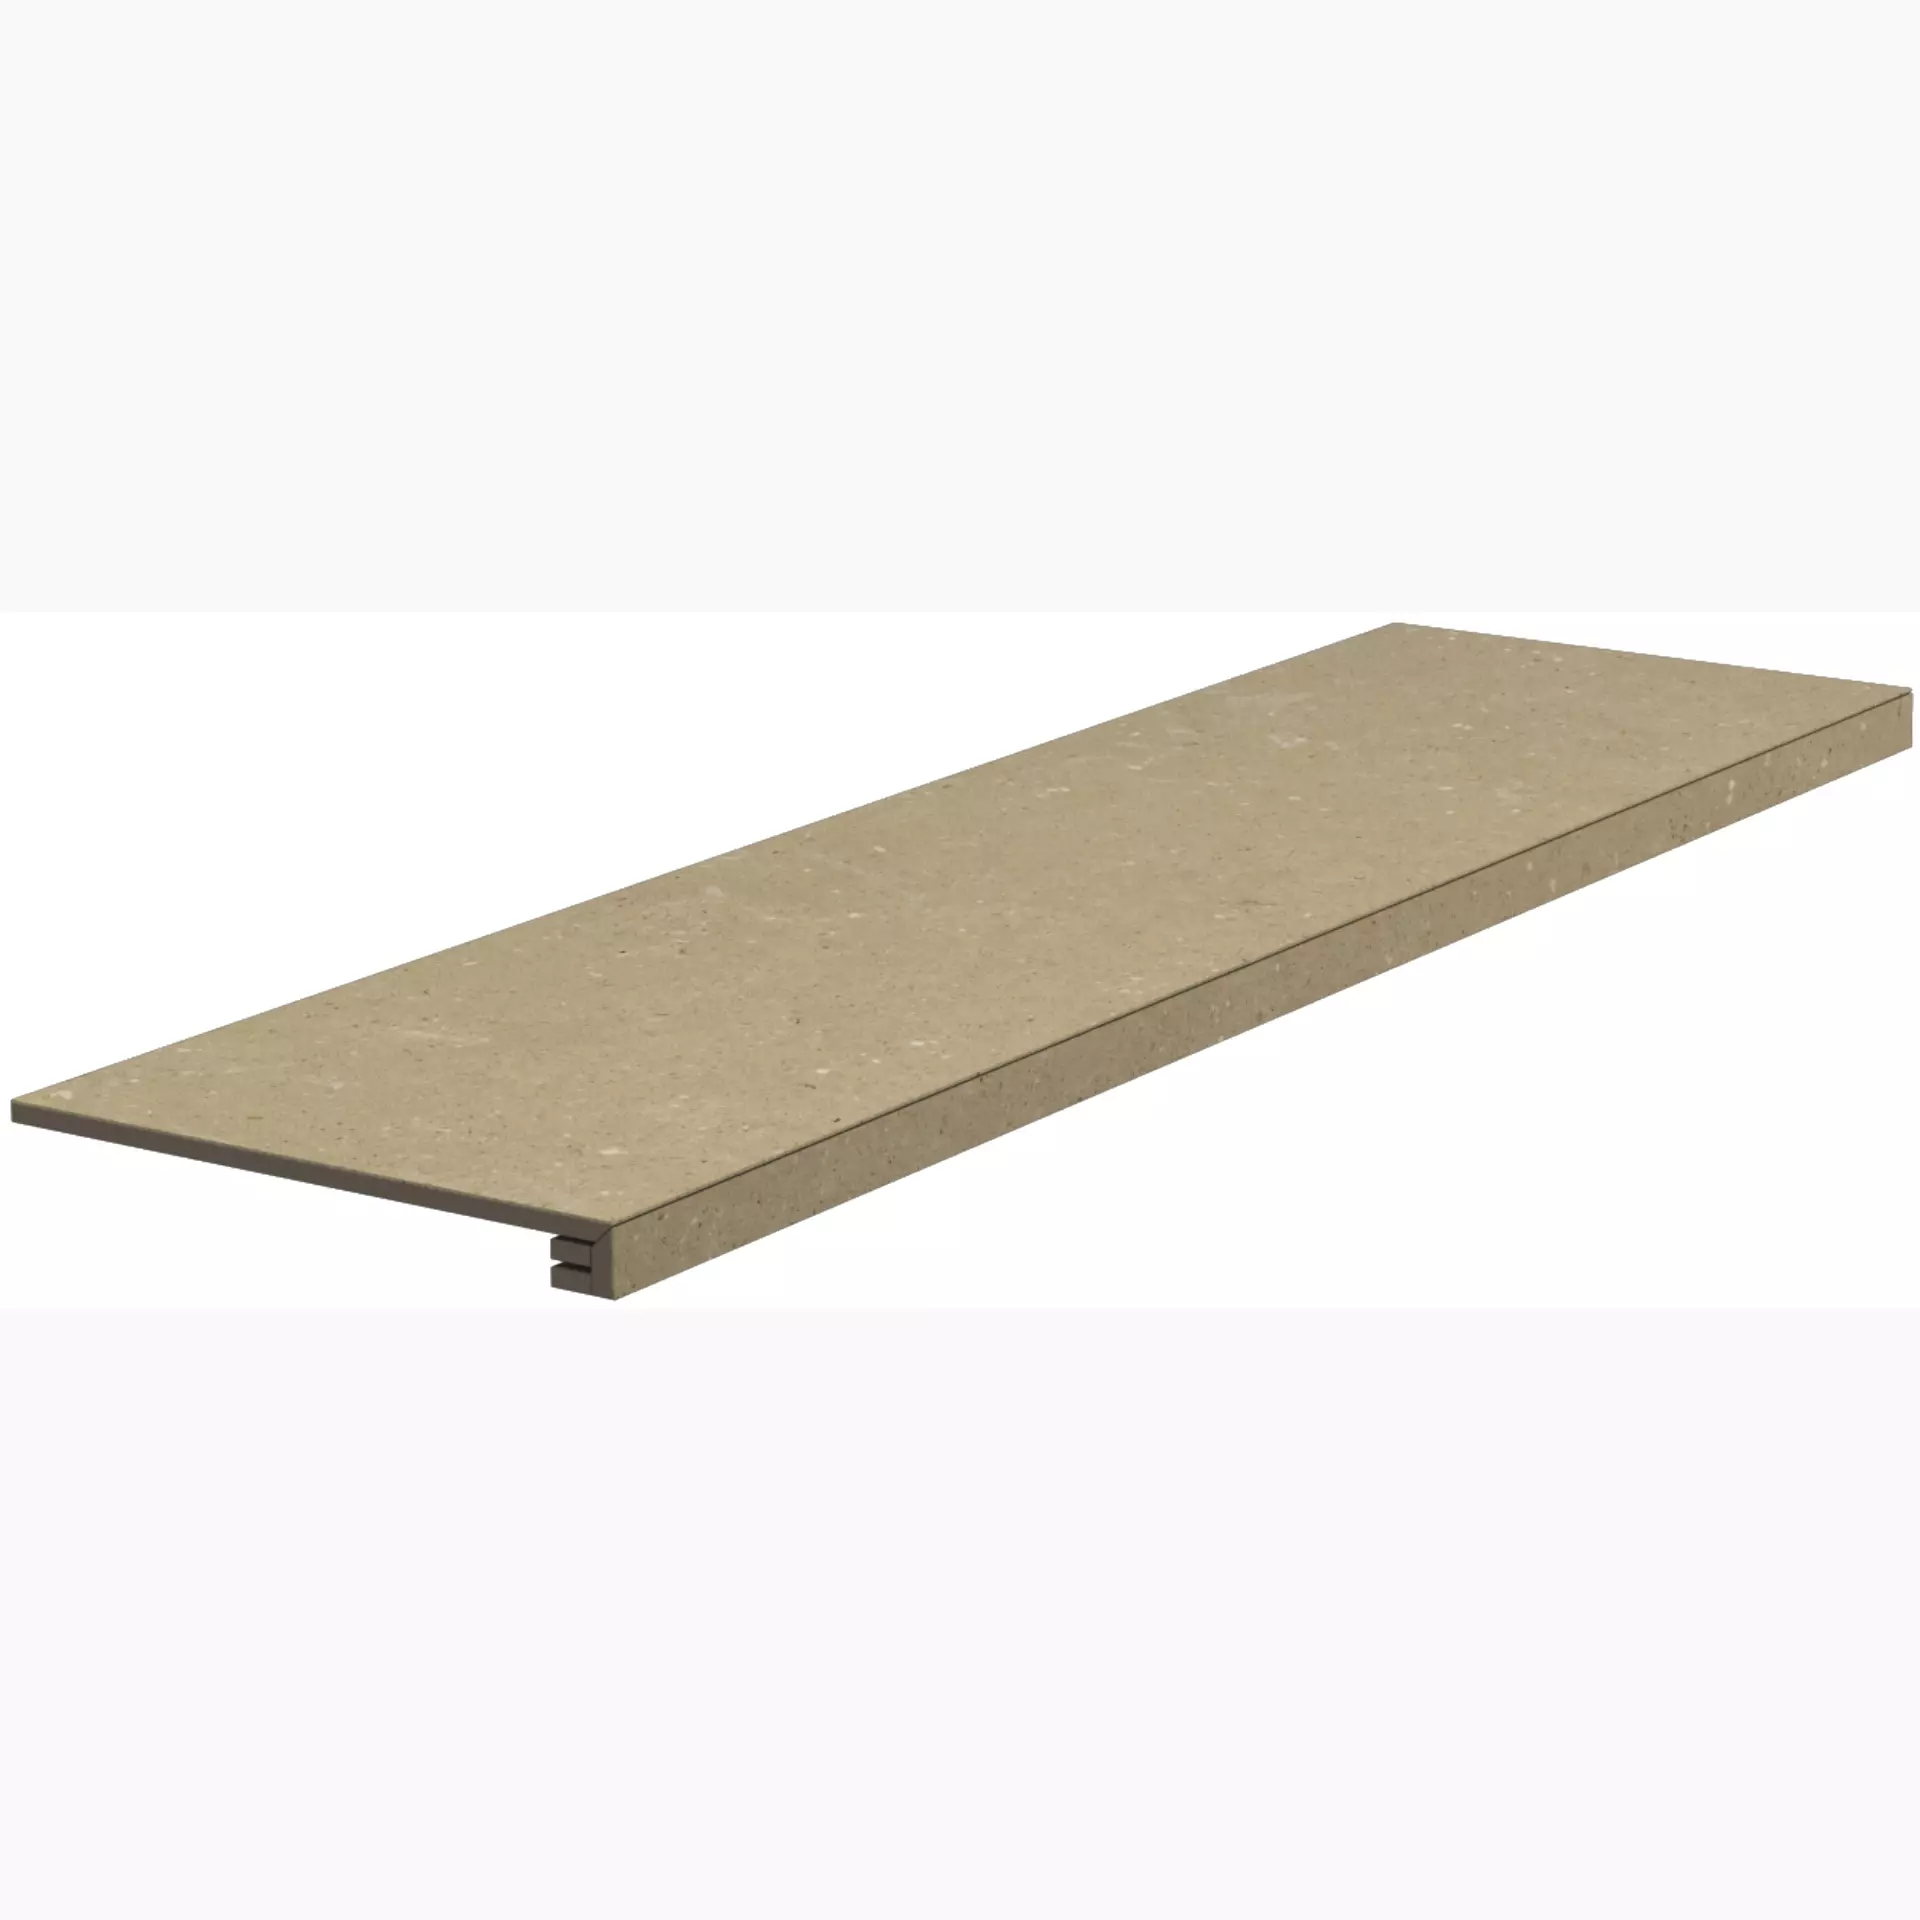 Del Conca Hwd Wild Beige Hwd01 Naturale Corner plate Step Right G3WD01RGD12 33x120cm rectified 8,5mm